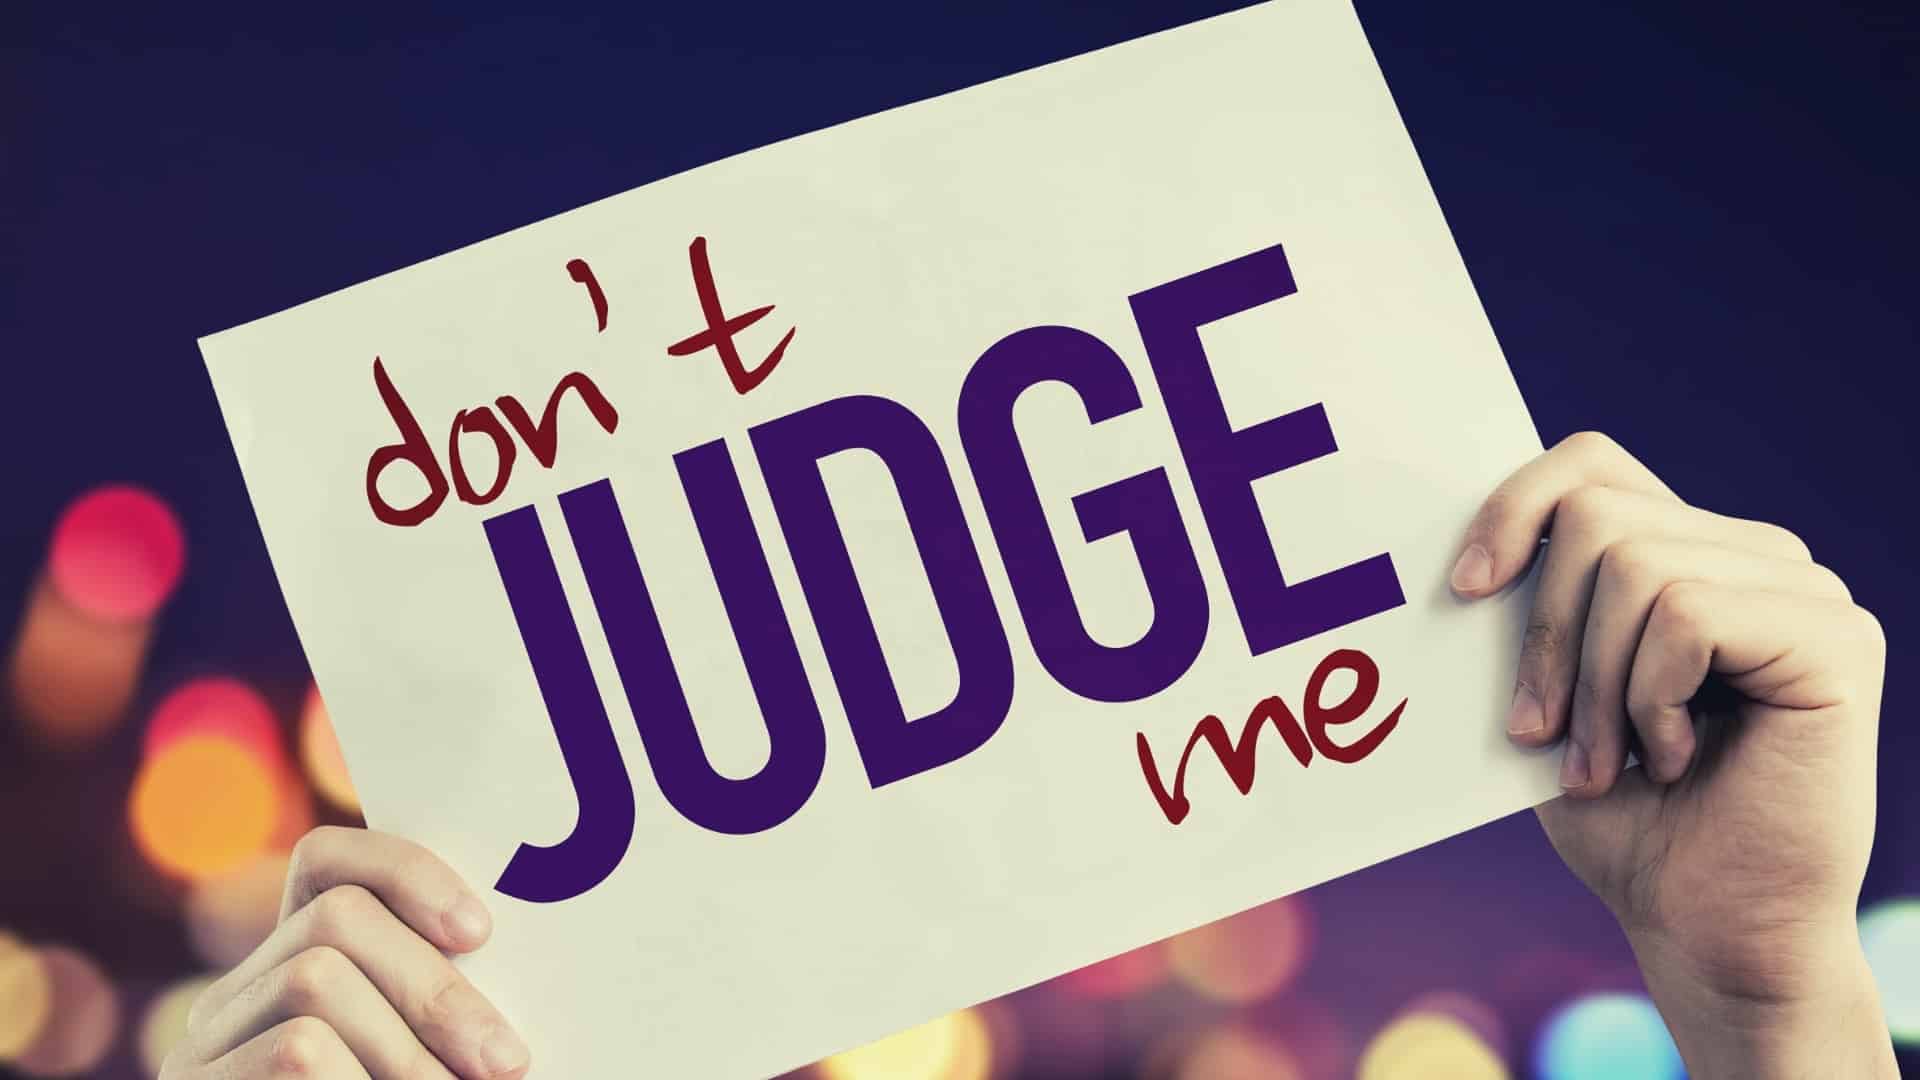 How to not judge others